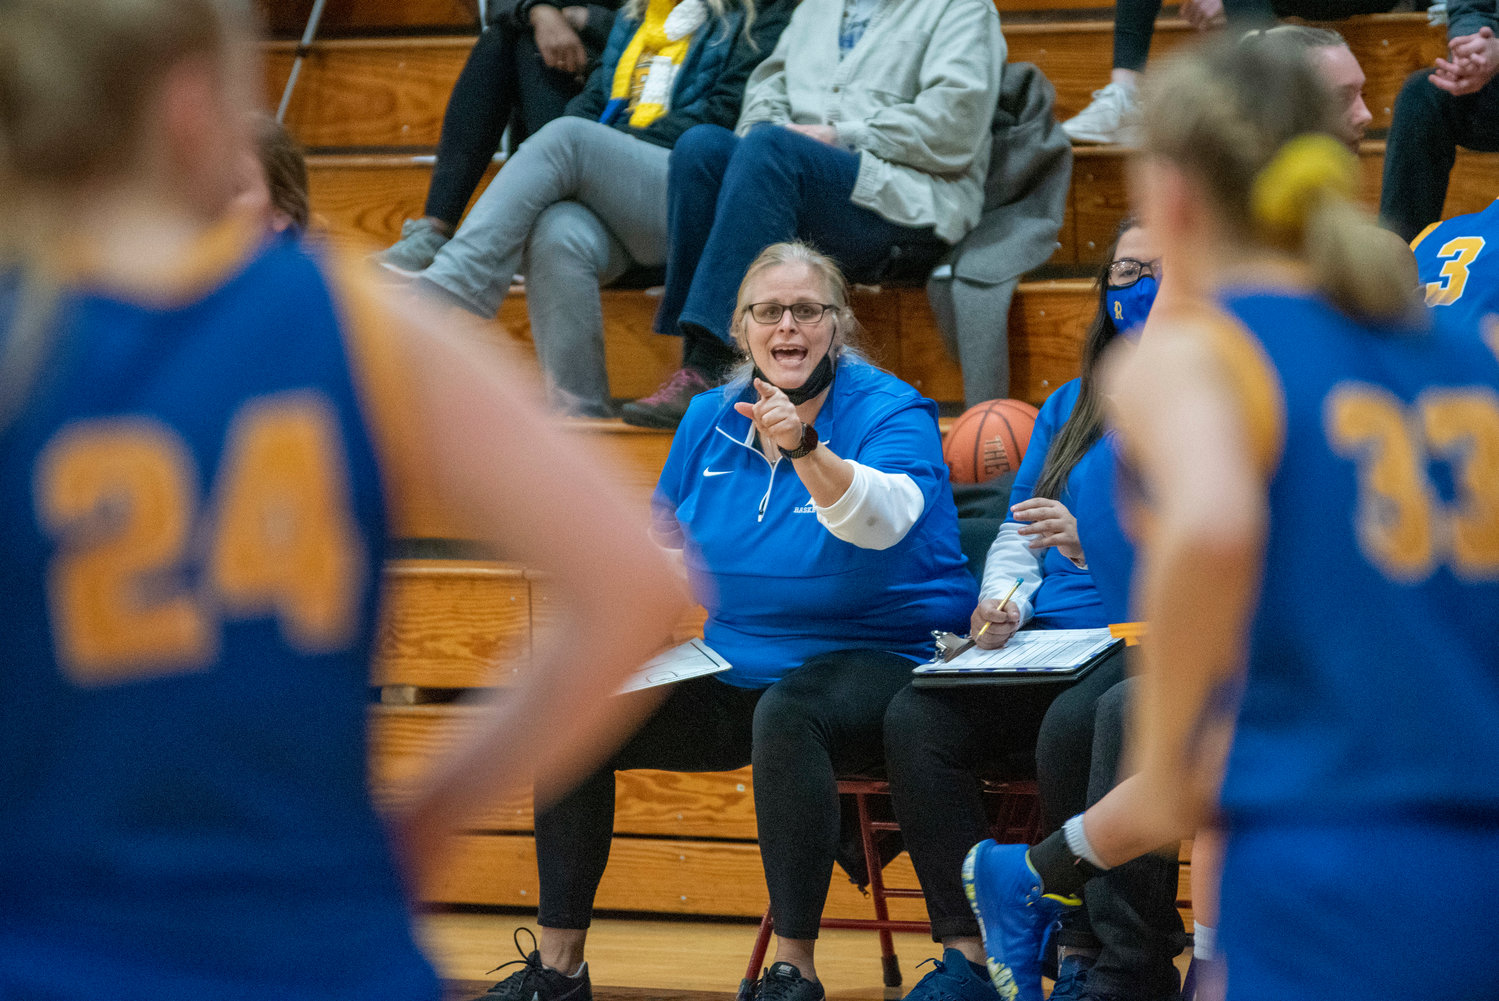 Rochester girls basketball coach Davina Serdahl calls out instructions to her team during a game against Tenino on Dec. 2, 2021.